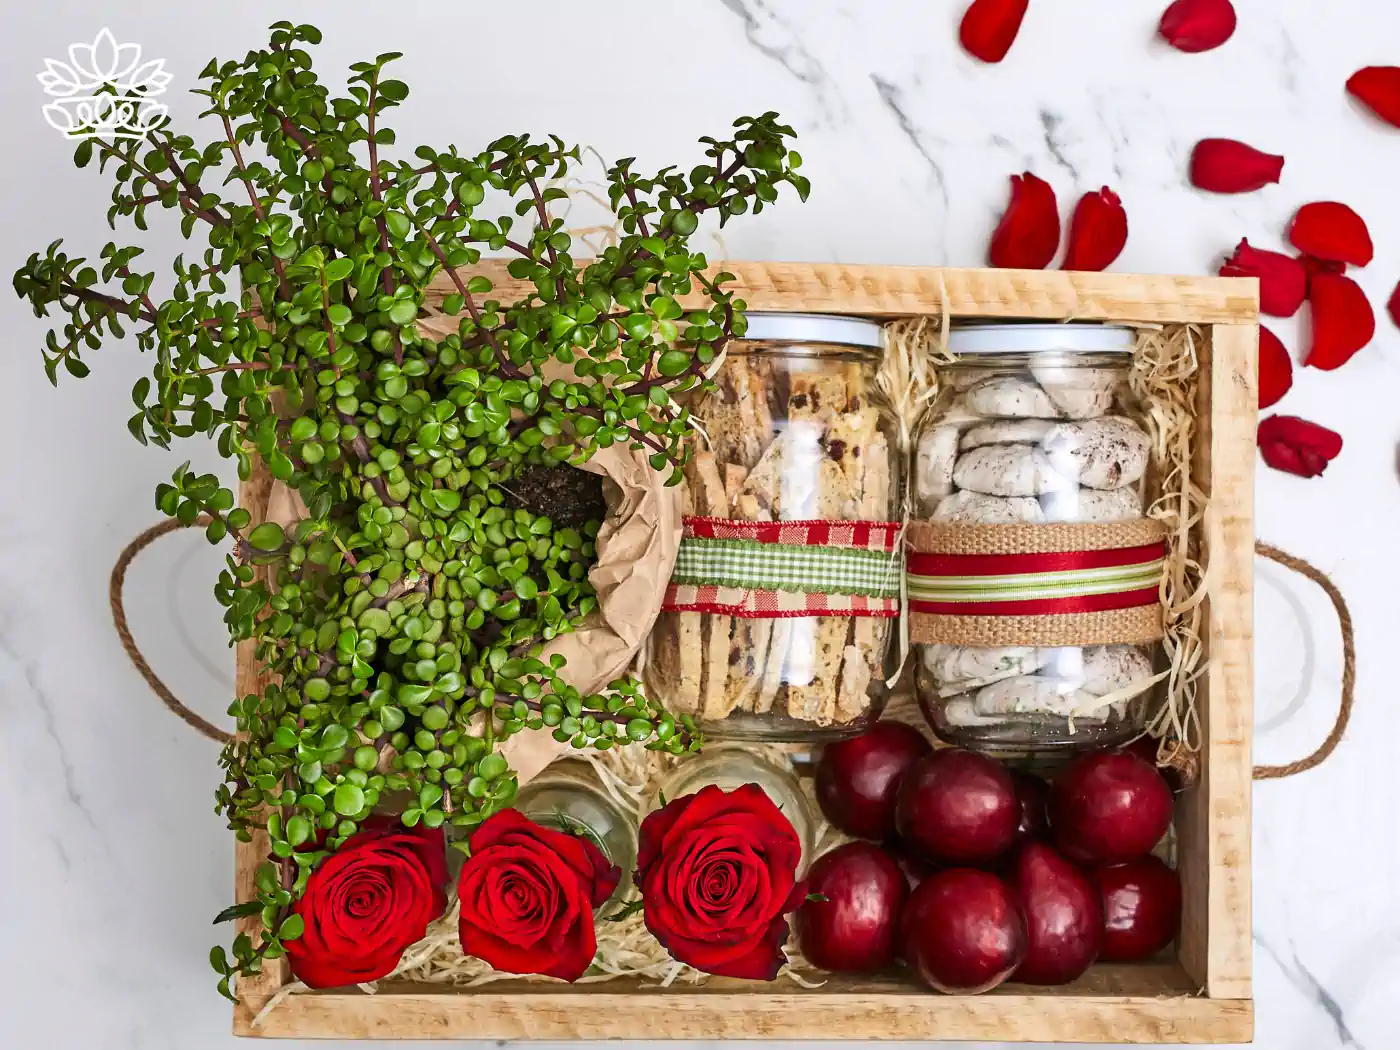 A beautifully arranged gift box with a vibrant potted plant, fresh red roses, jars of homemade cookies and meringues, and lush red apples, set against a marble background with scattered rose petals. Guest House and Hotel Gift Boxes Delivered with Heart. Fabulous Flowers and Gifts.